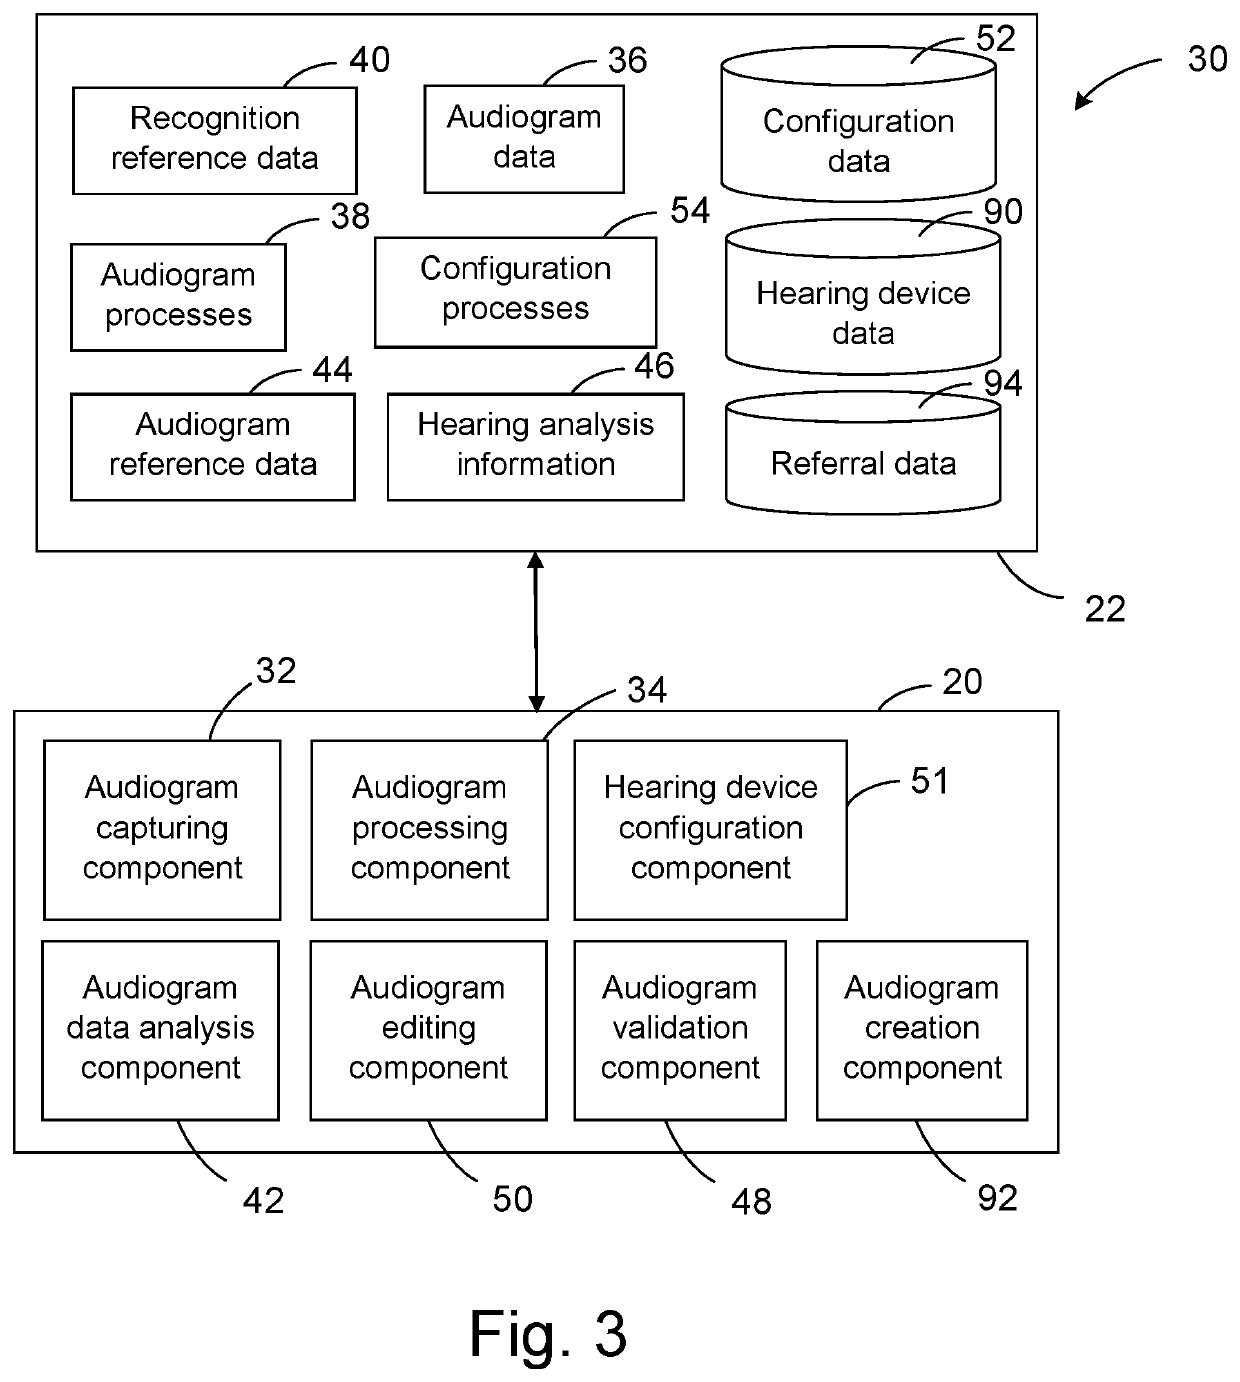 A system for configuring a hearing device